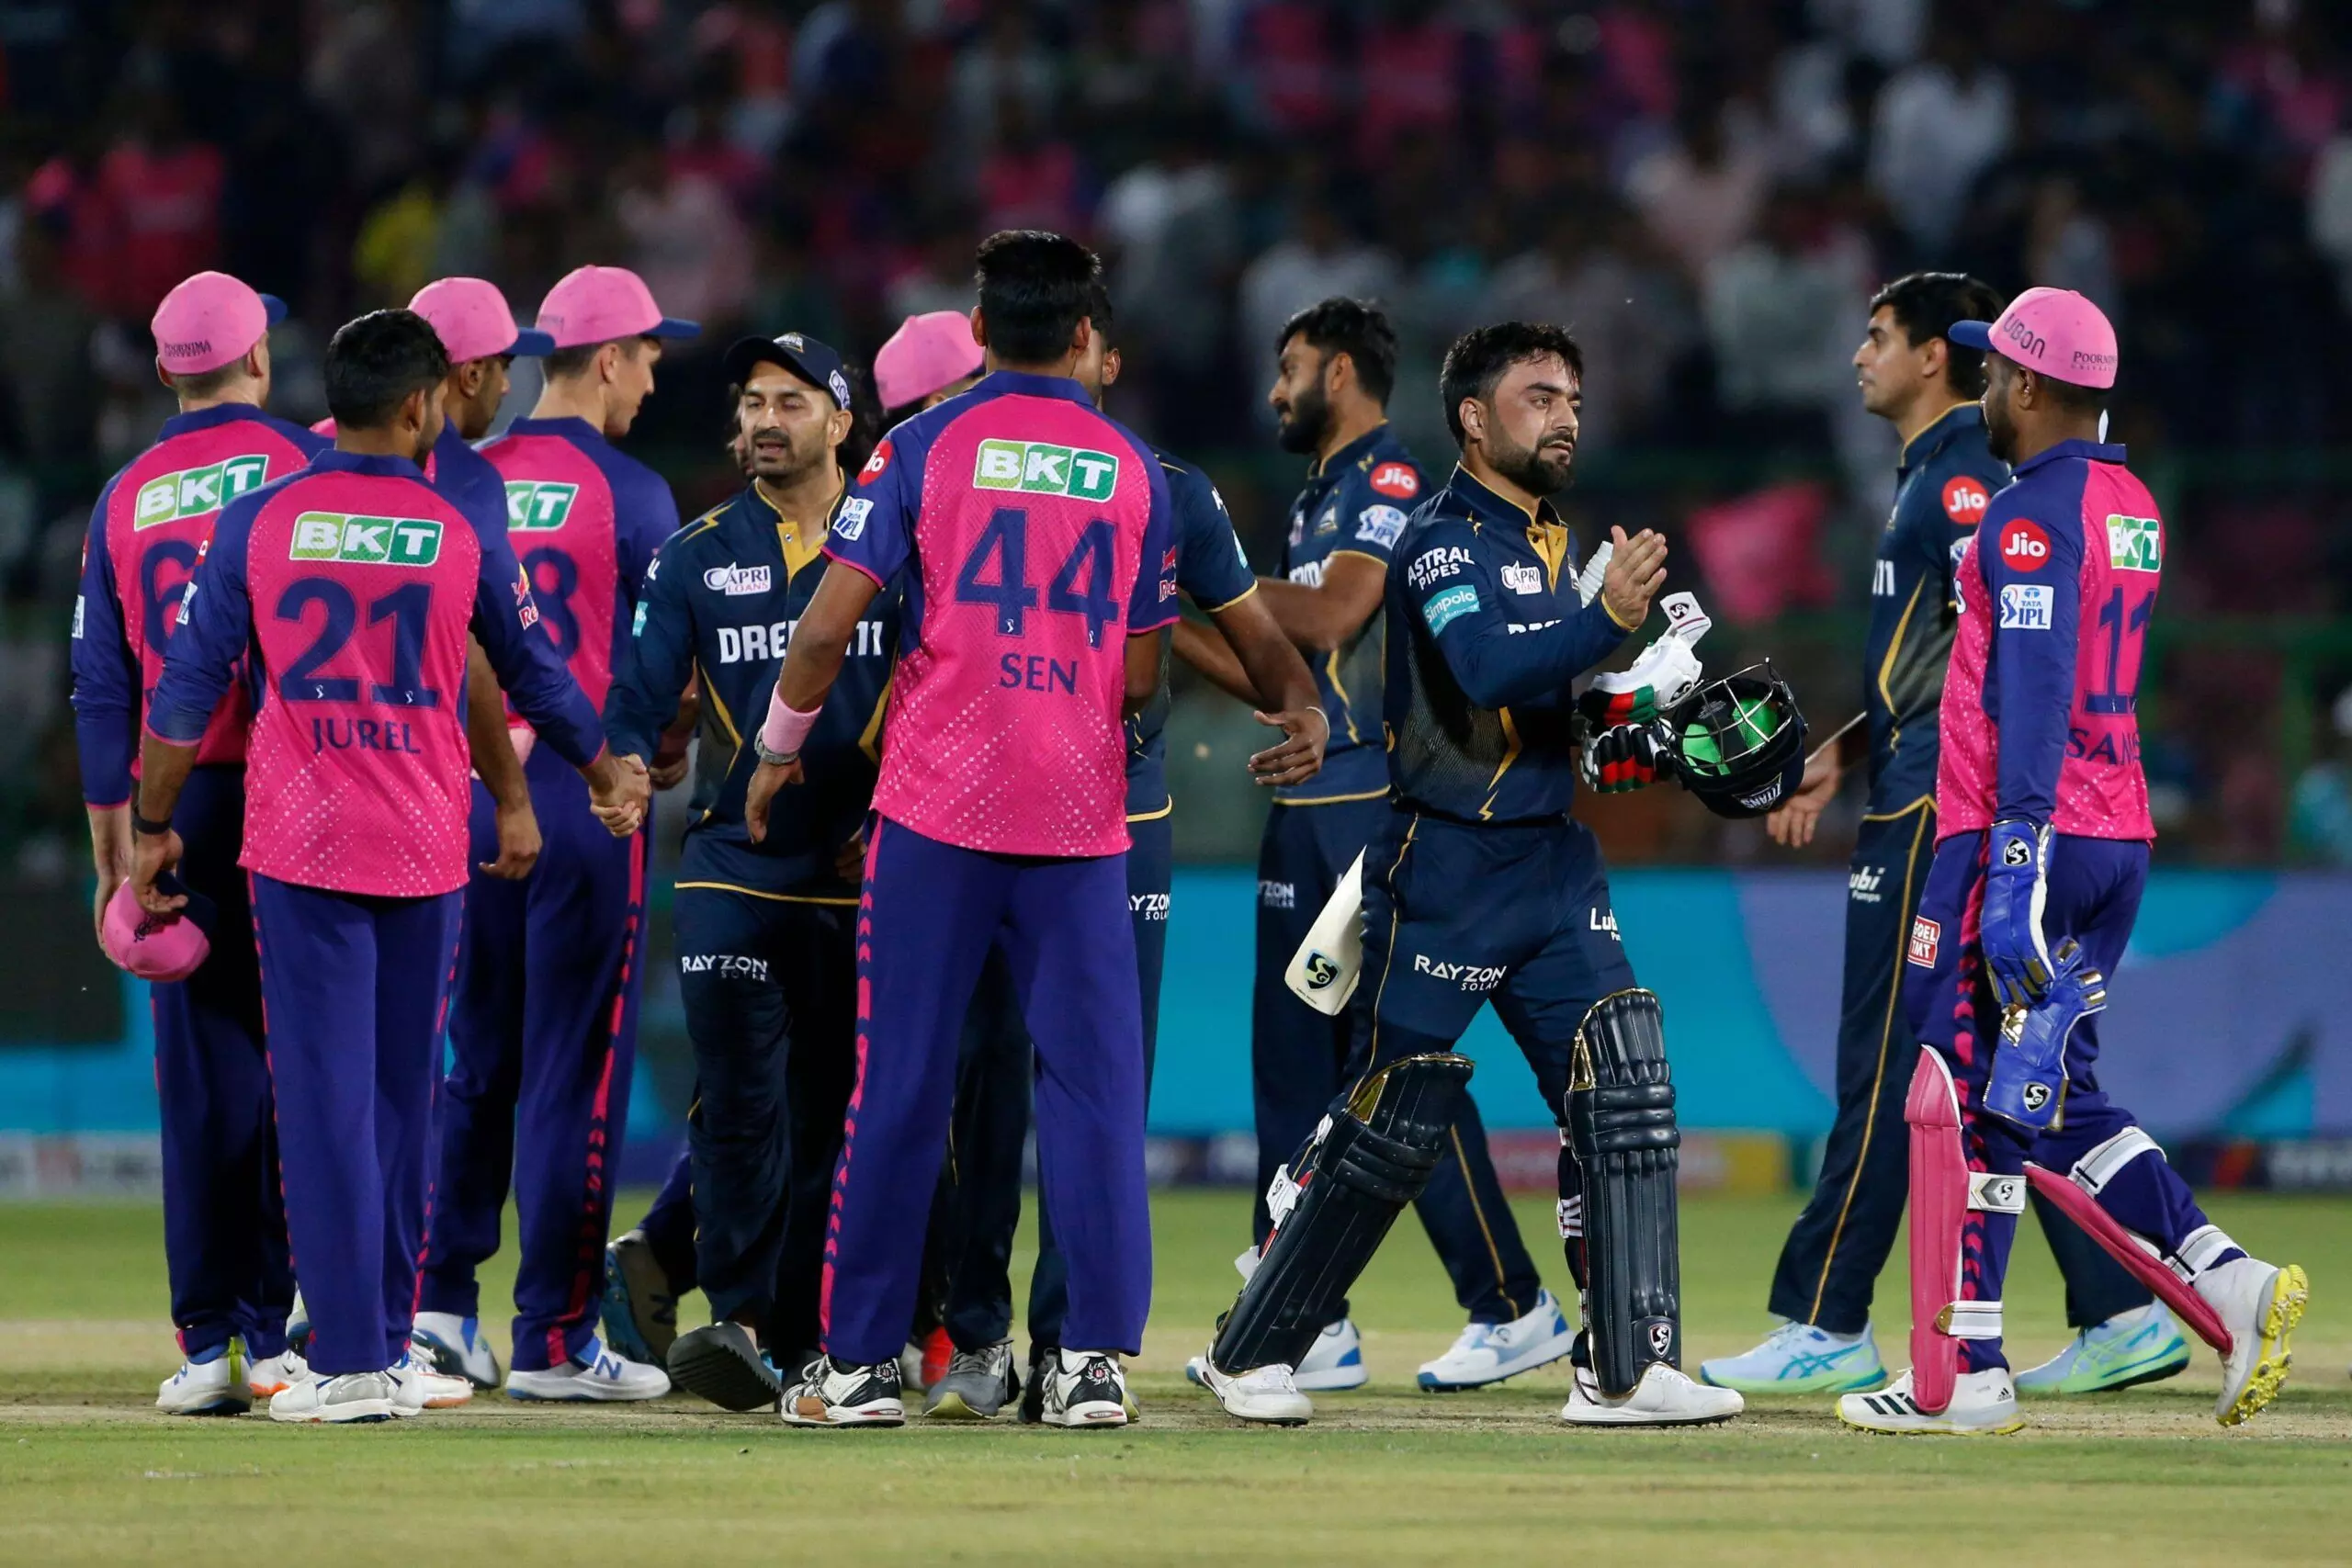 RR vs GT: Sanju Samson told how Rajasthan Royals lost the game, blamed them for the defeat